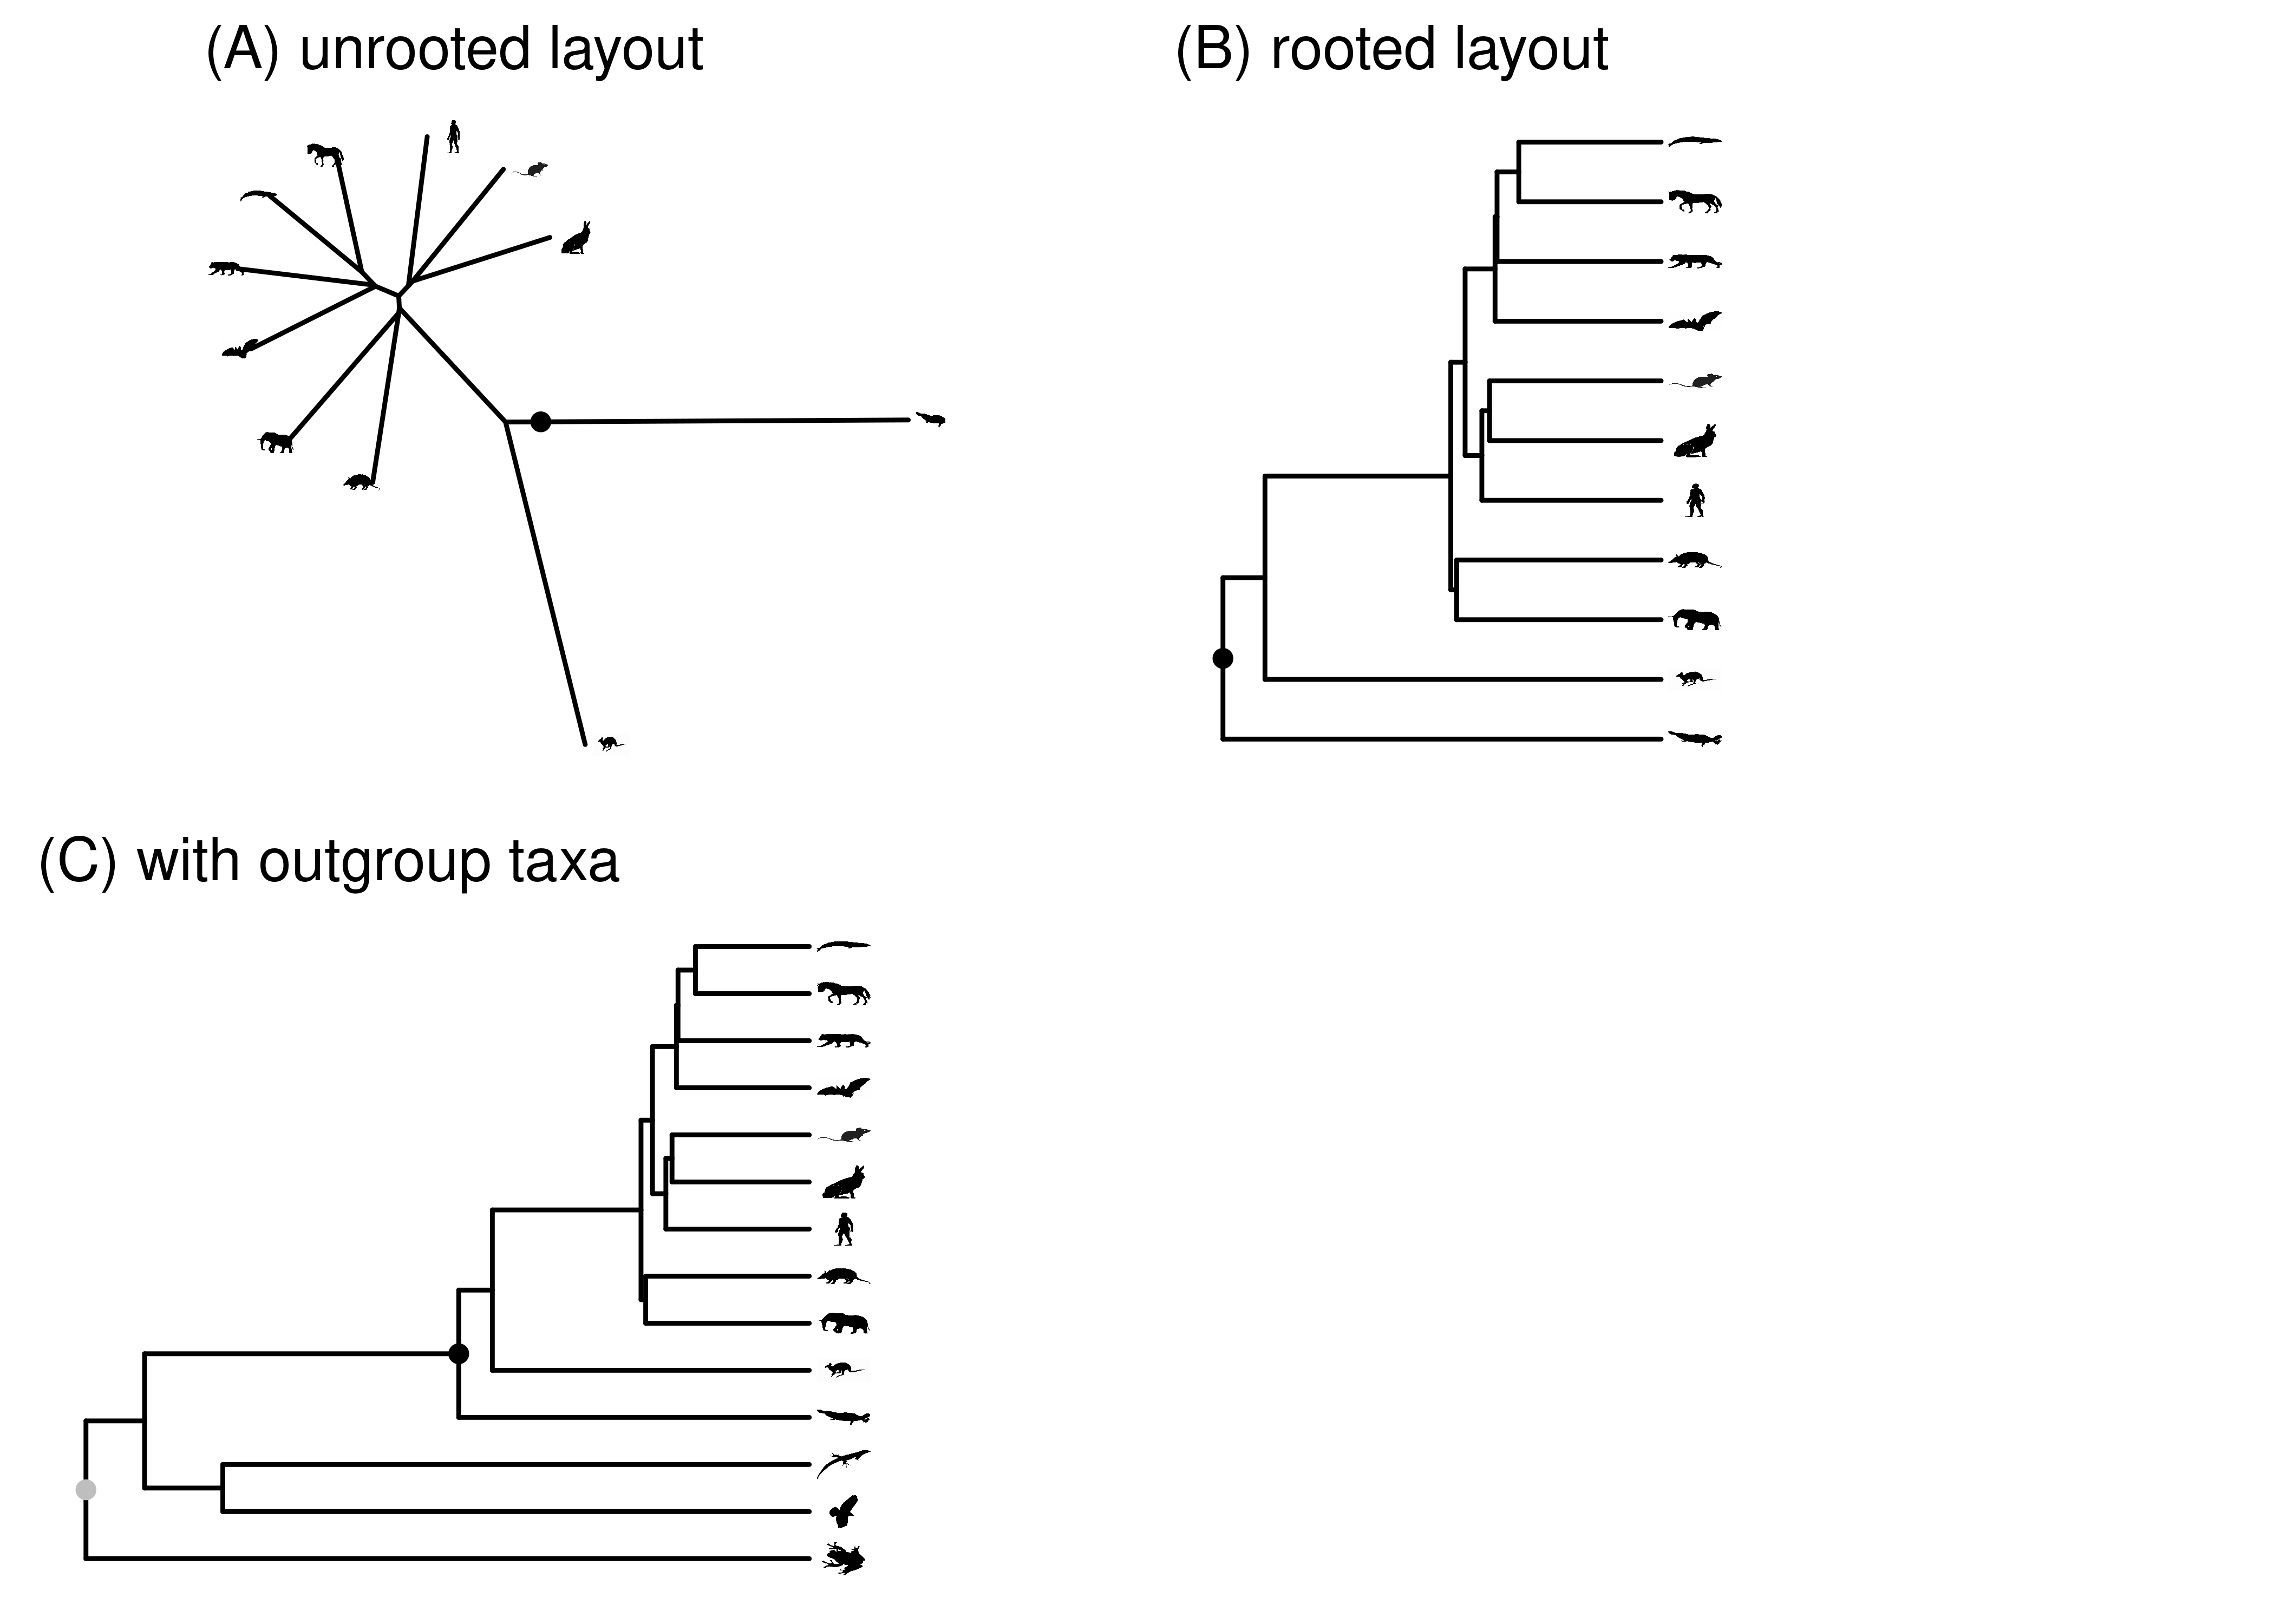 The root of the mammal tree is shown in black. (A) Unrooted layout. (B) Rooted layout. (C) Rooted layout, including outgroup. The root for the whole tree, shown in gray, is placed in the outgroup. The node where the ingroup is attached to the rest of the tree is the ingroup root. In this case, that is the black mammal root.